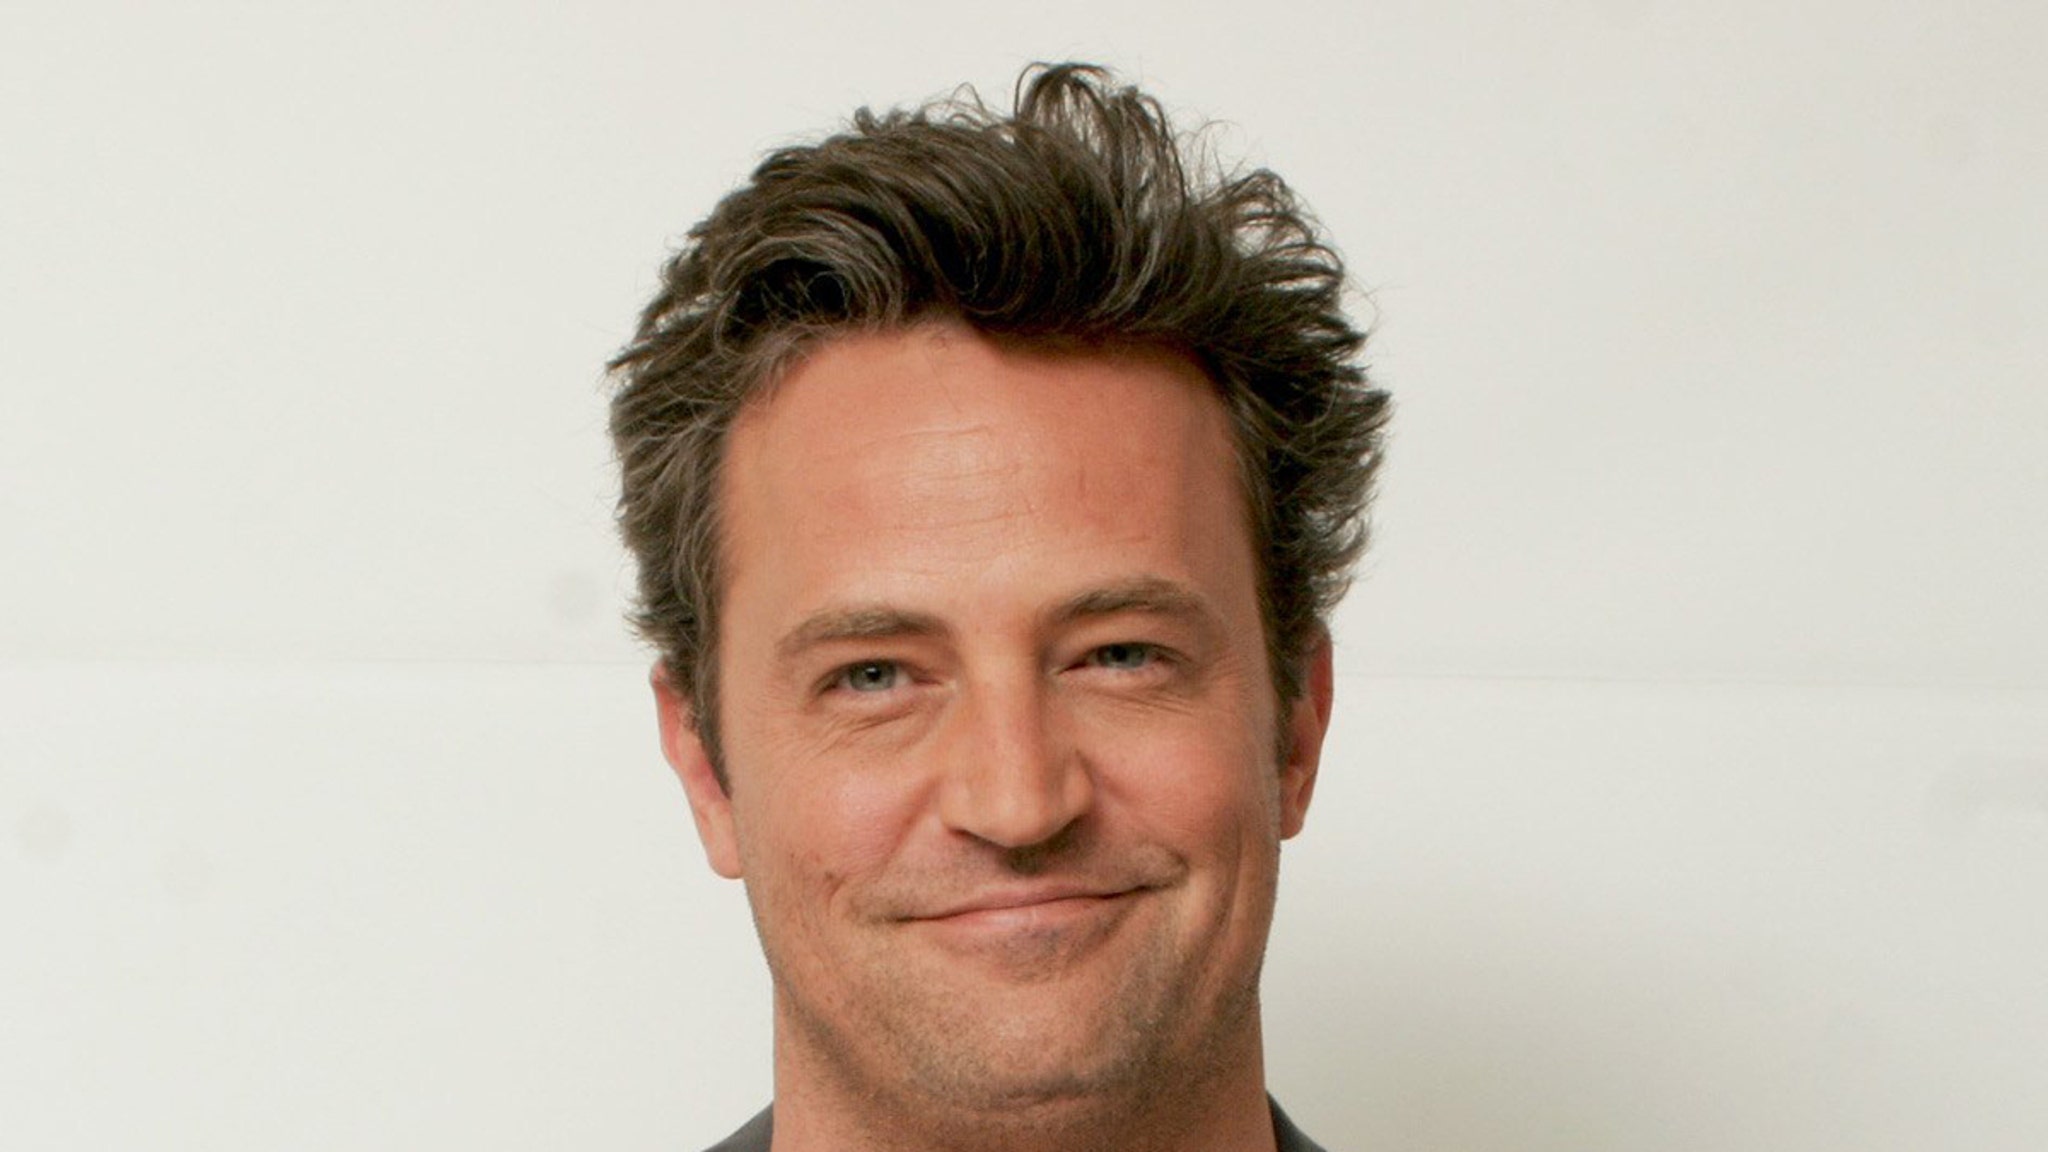 ‘Friends’ Star Matthew Perry Dead at 54 After Apparent Drowning